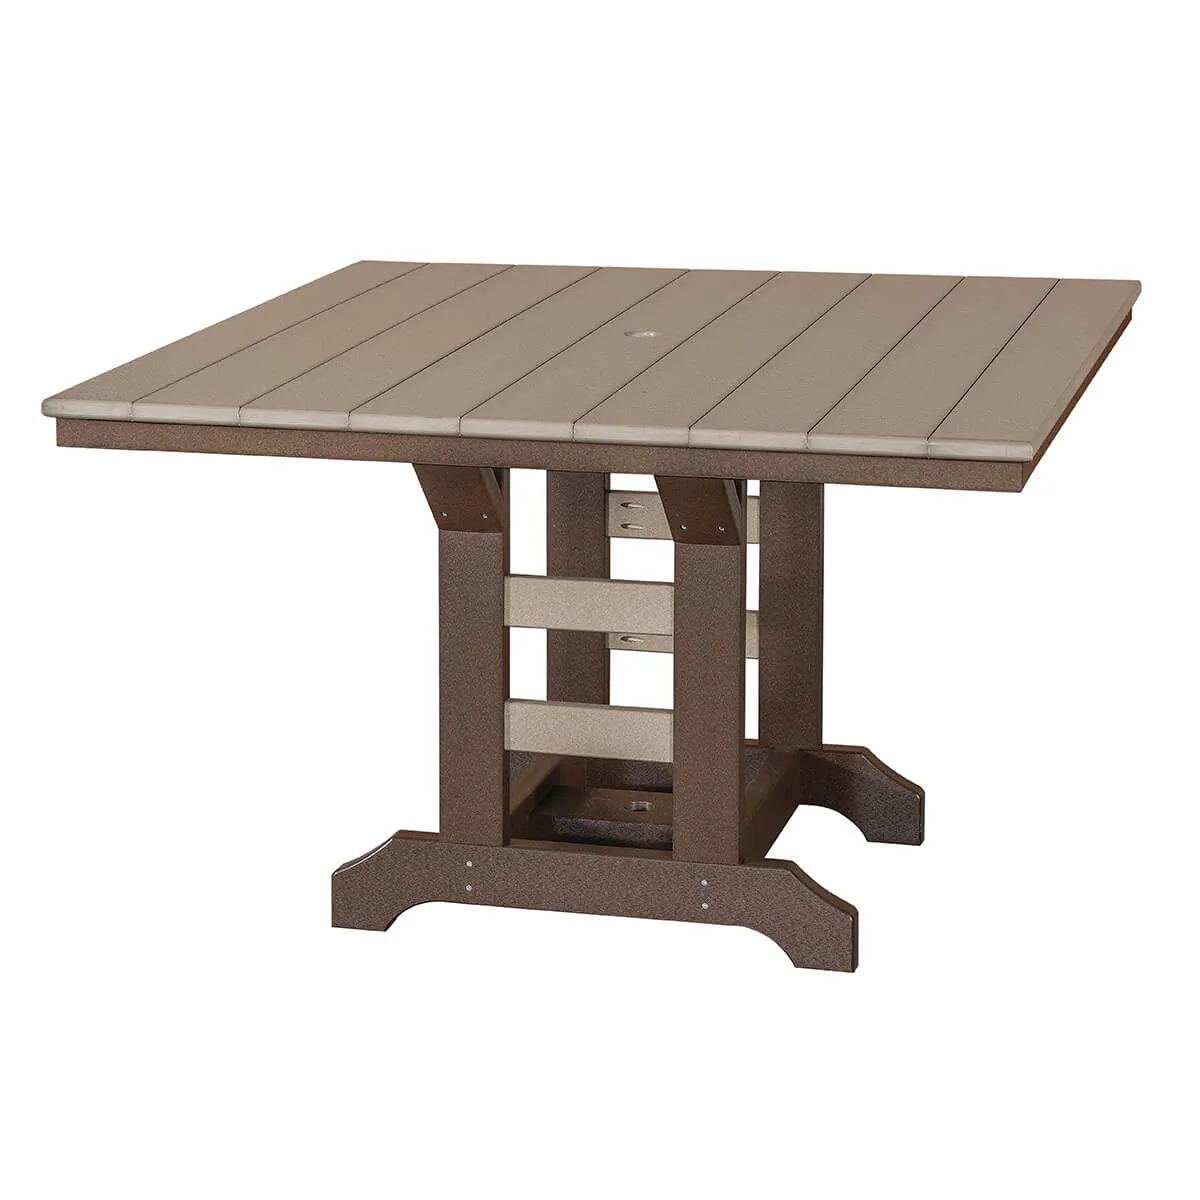 48 Inch Square Table